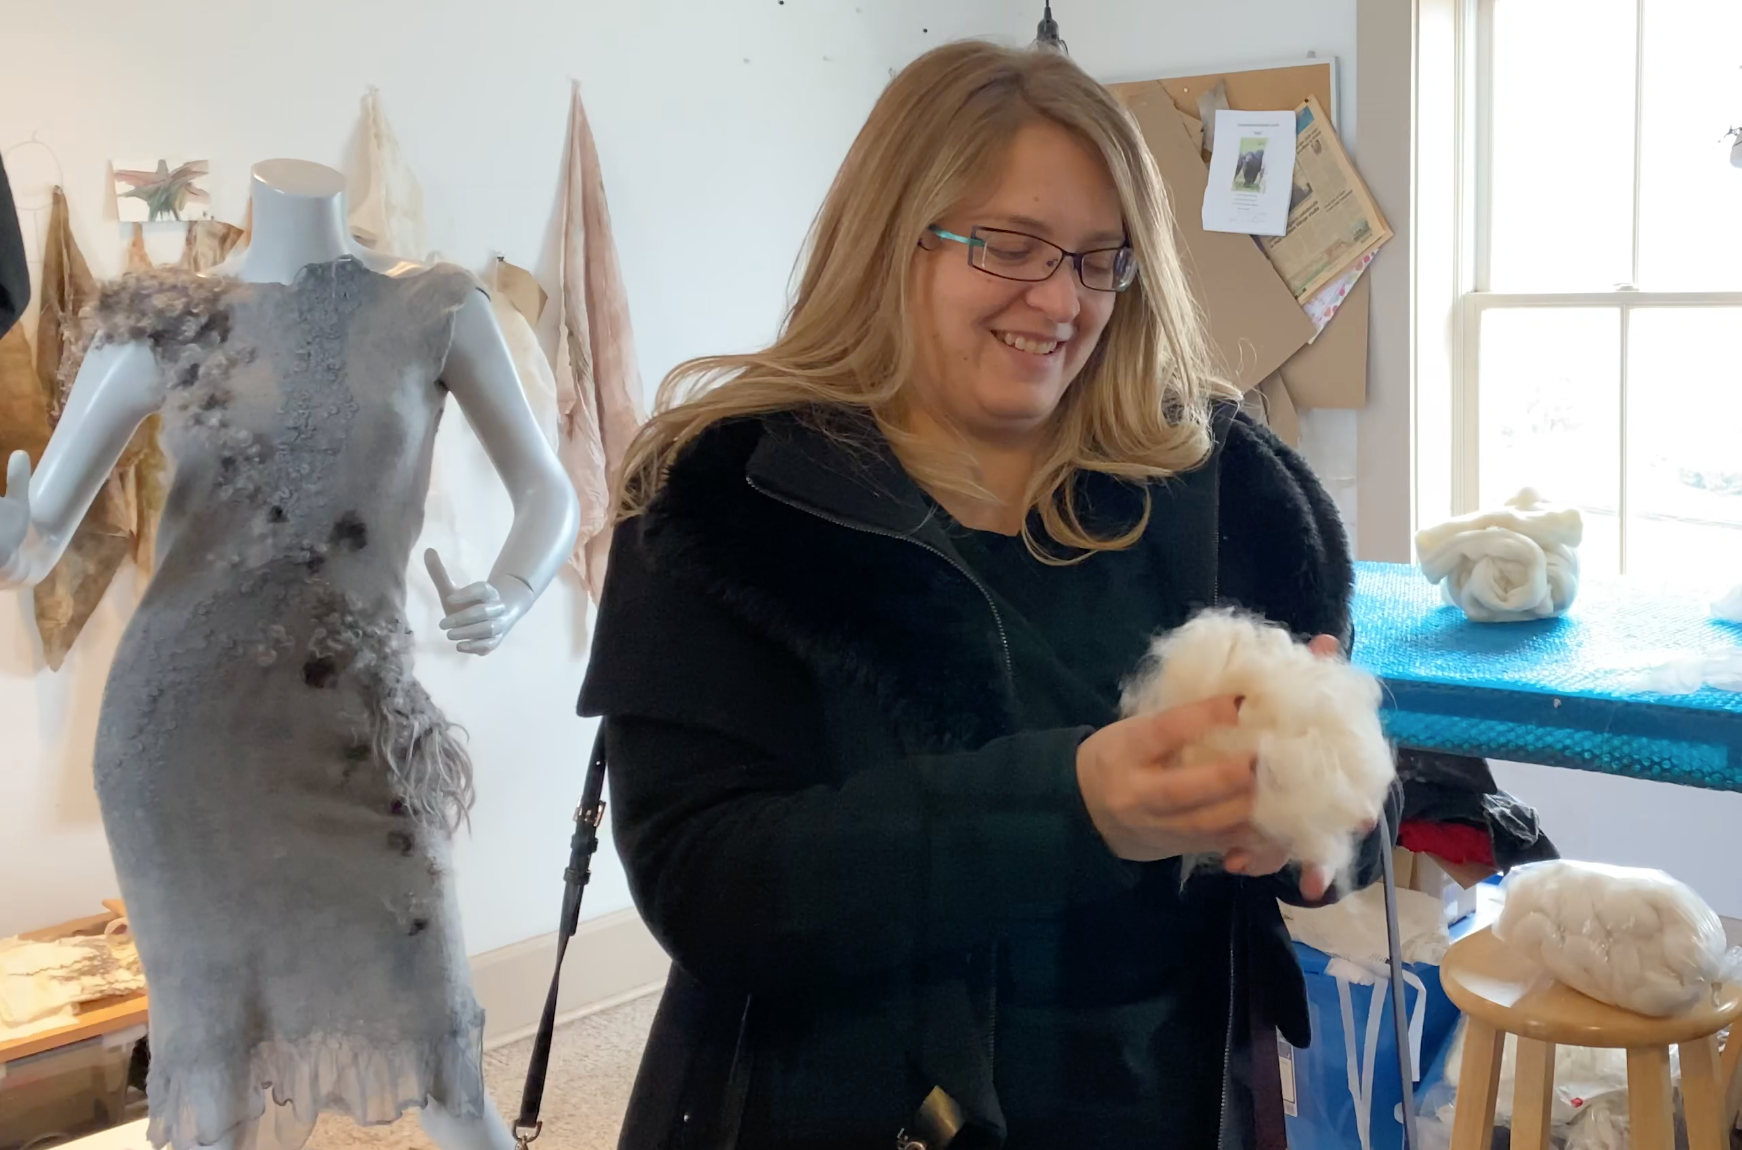 A woman with long blond hair and glasses smiles at a puffball of white alpaca wool. Behind her is a dress by Celeste Malvar Stewart to her right and to her left a long work table covered in blue bubble wrap in front of a bright window